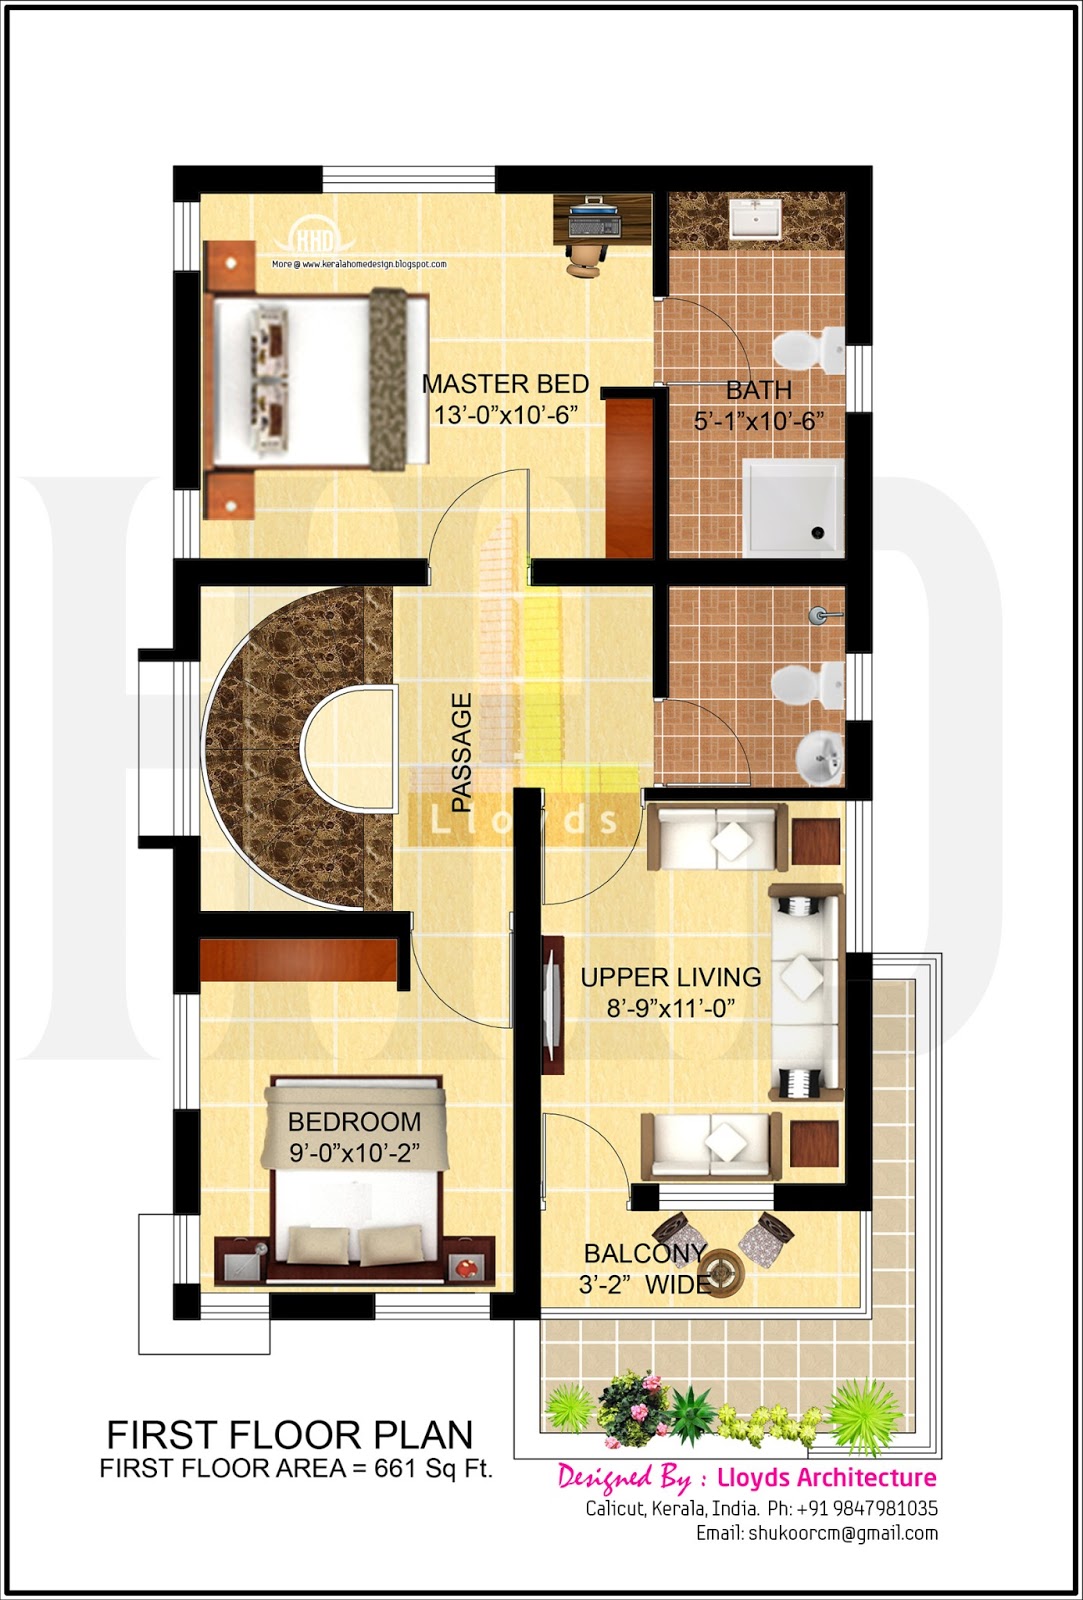 4 bedroom house plan in less that 3 cents | Home Kerala Plans